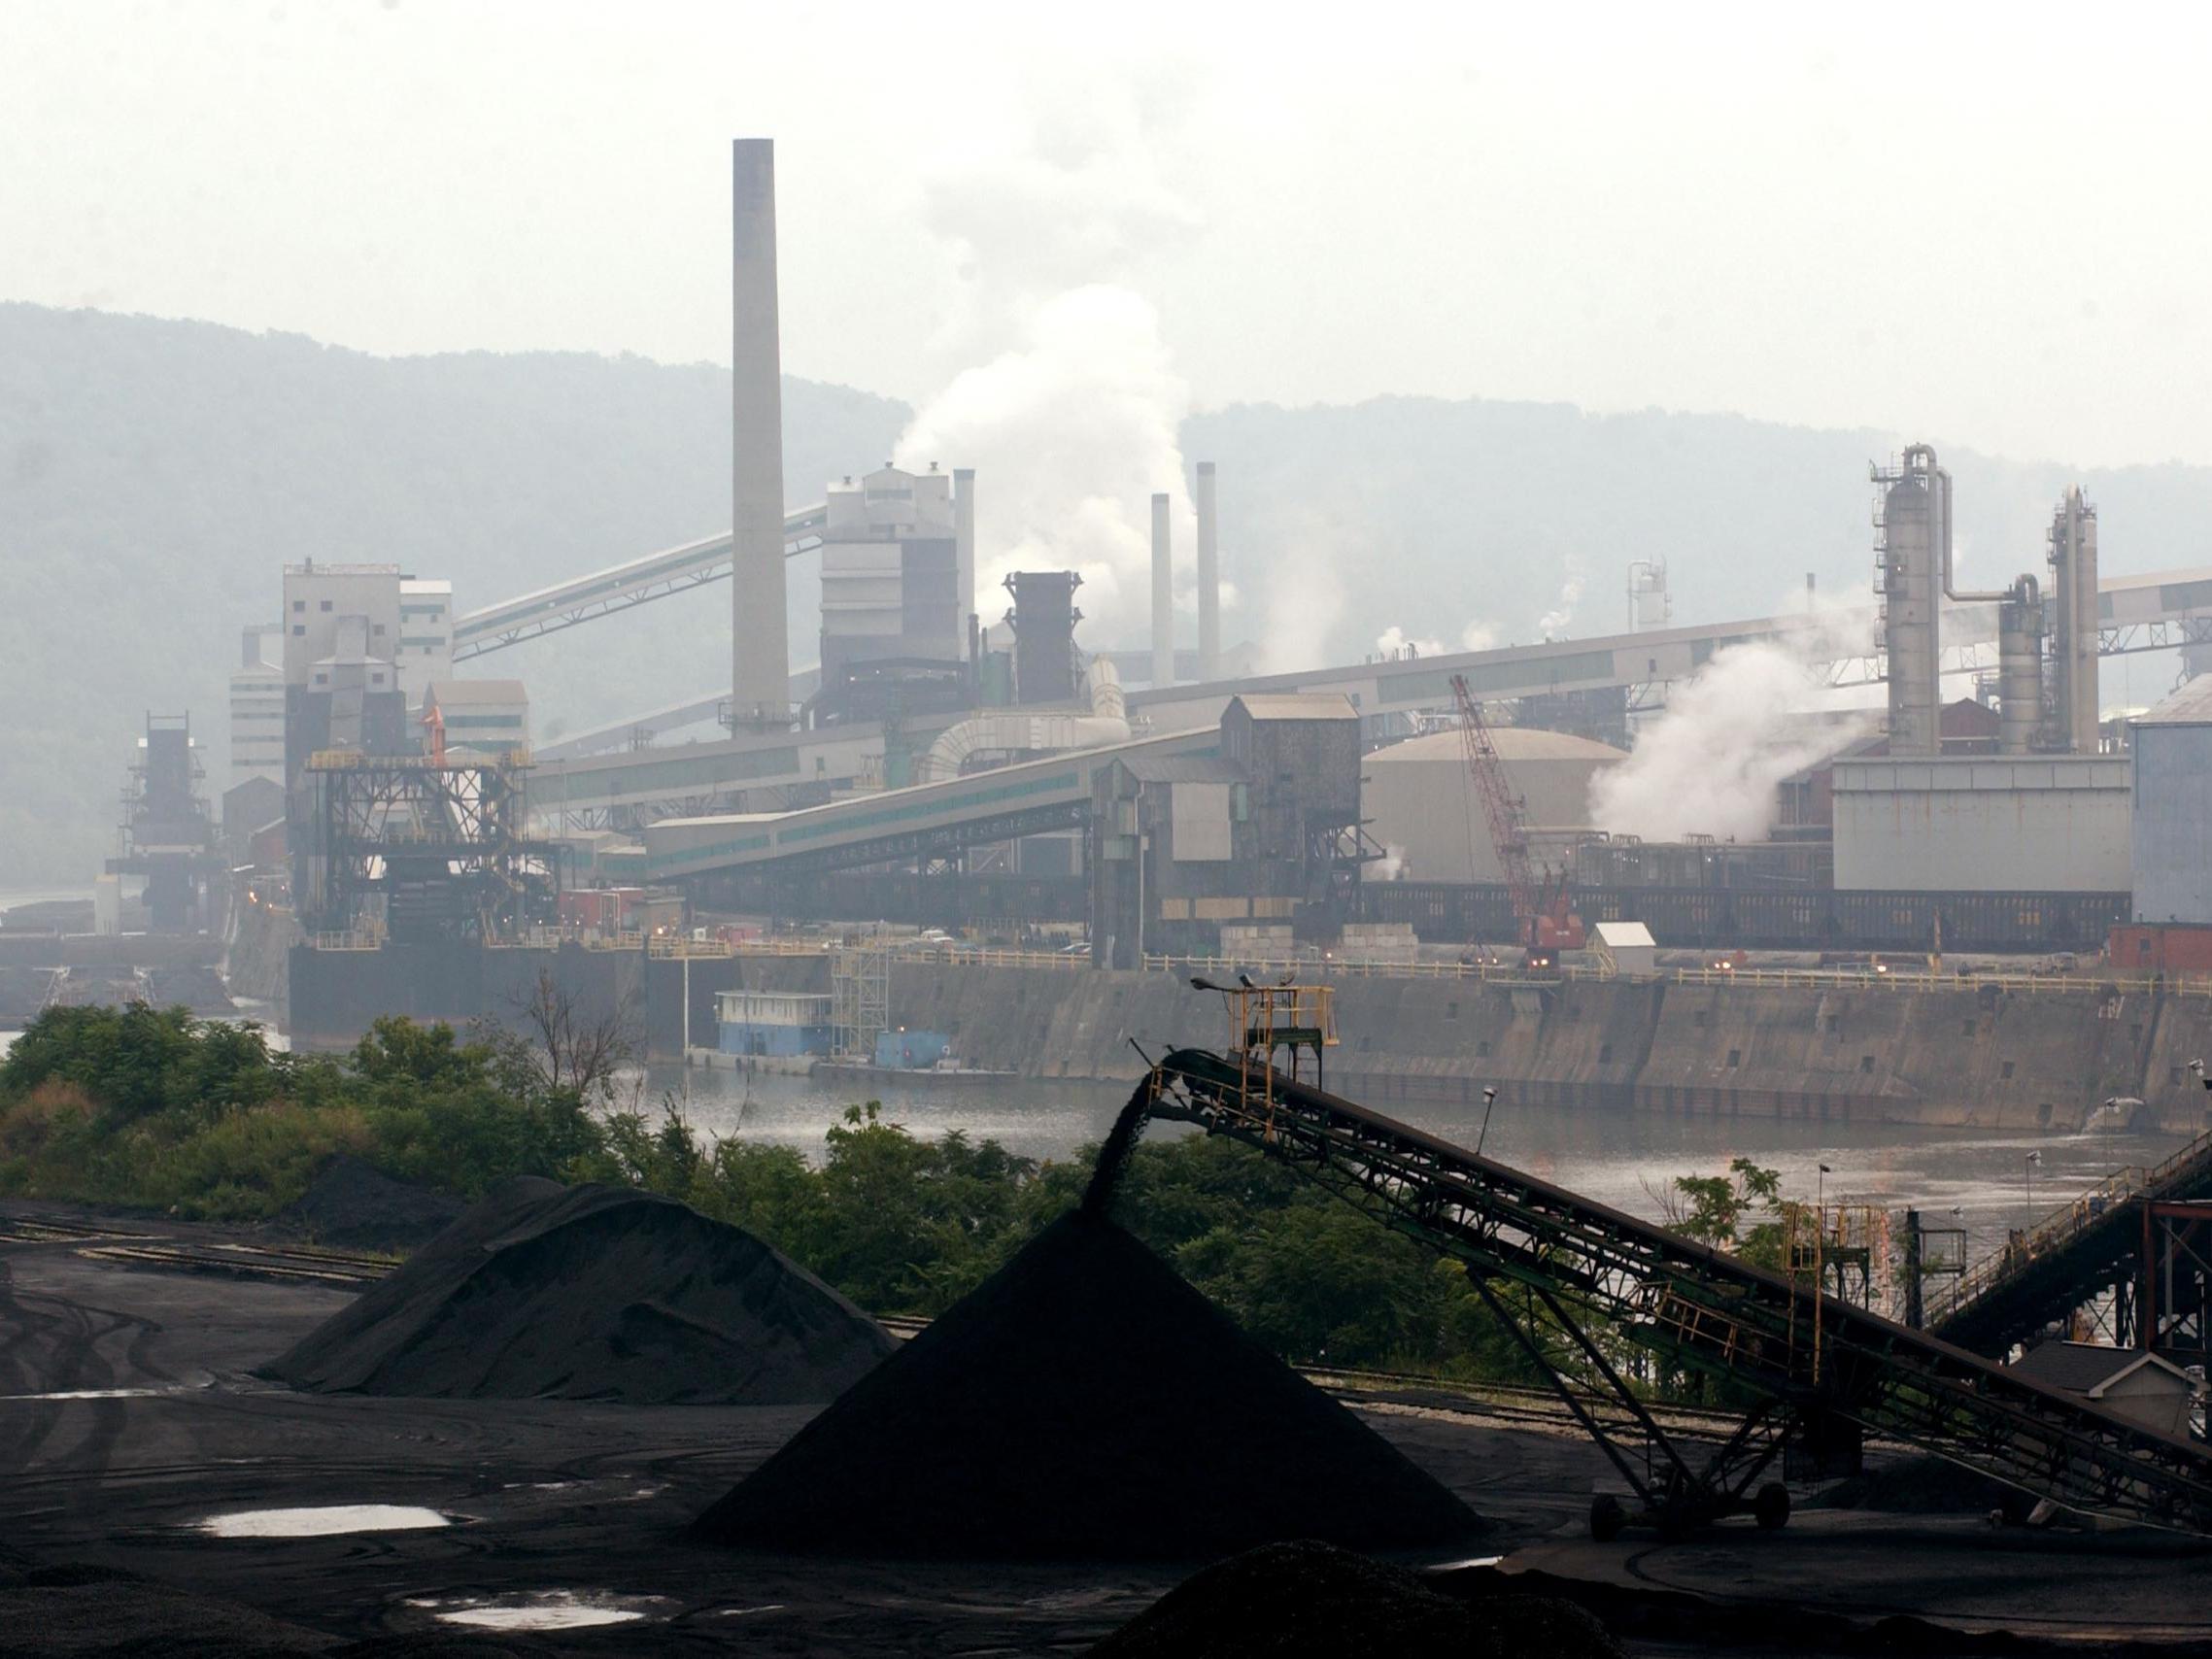 Nearly half of global coal plants will be unprofitable this year, study shows - The Independent